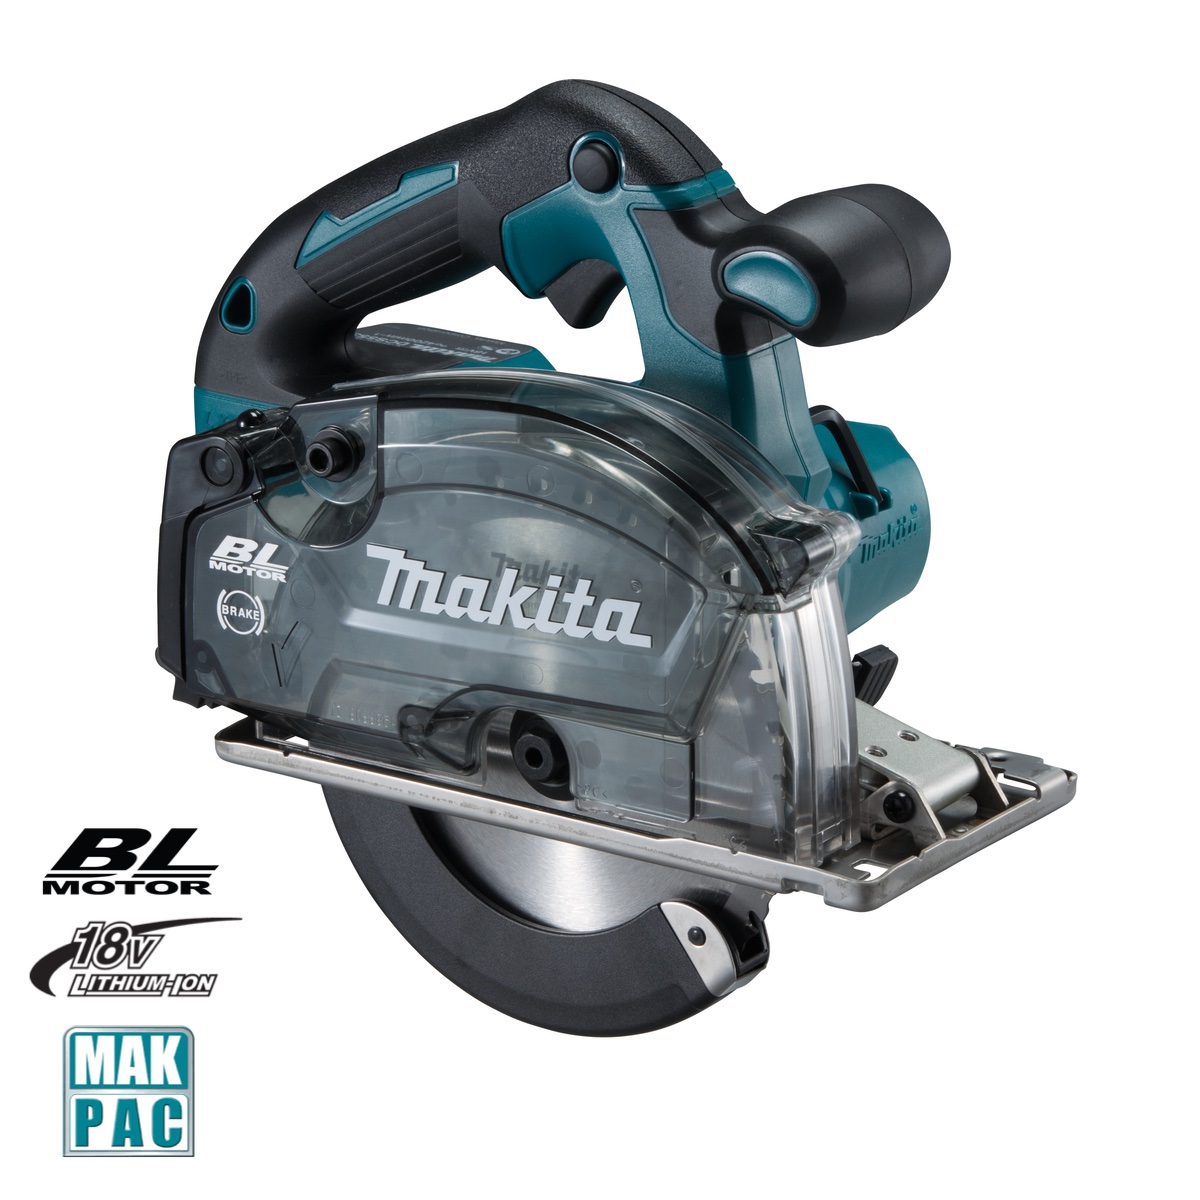 scie-circulaire-agrave;-meacute;taux-makita-18v-dcs553rtj-2x50ah